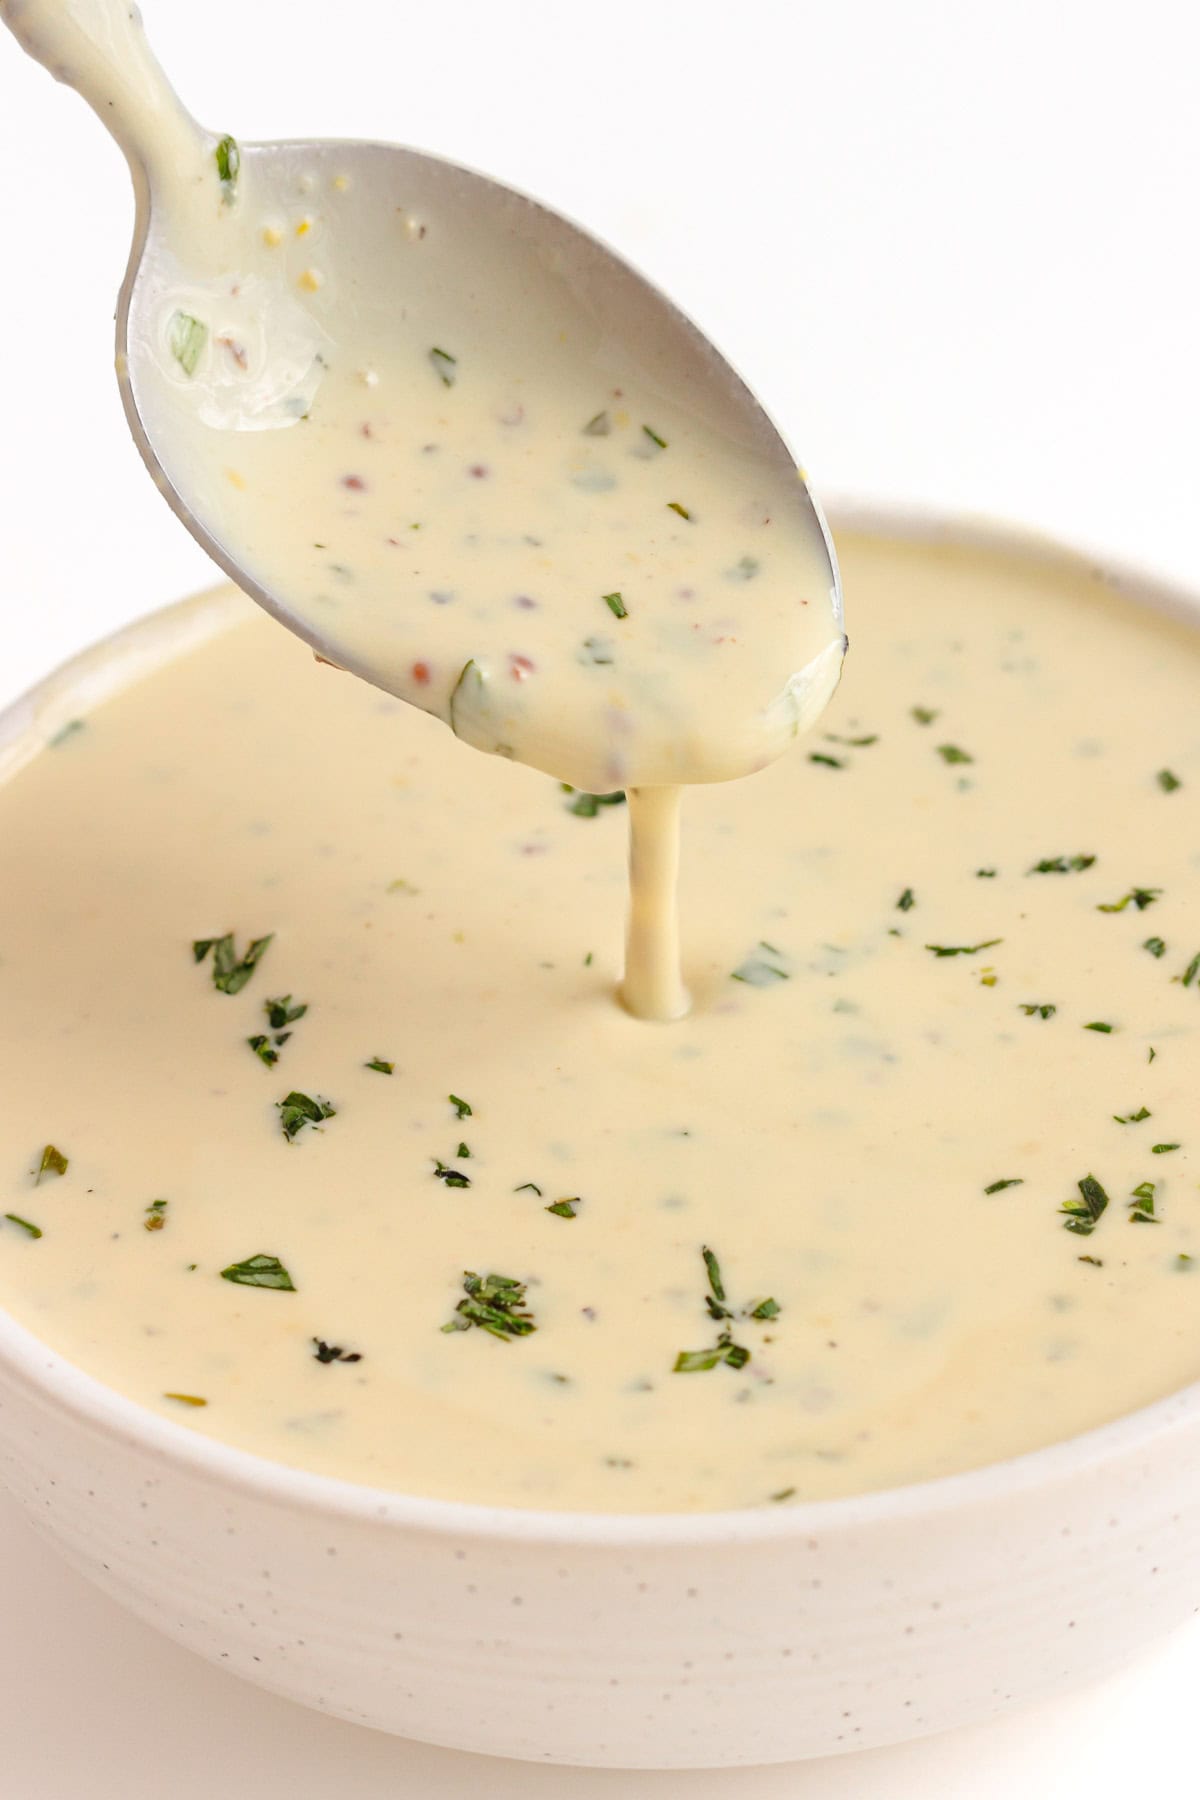 Spoon of Dijon Mustard Sauce drizzling into a small white bowl filled with the same sauce.